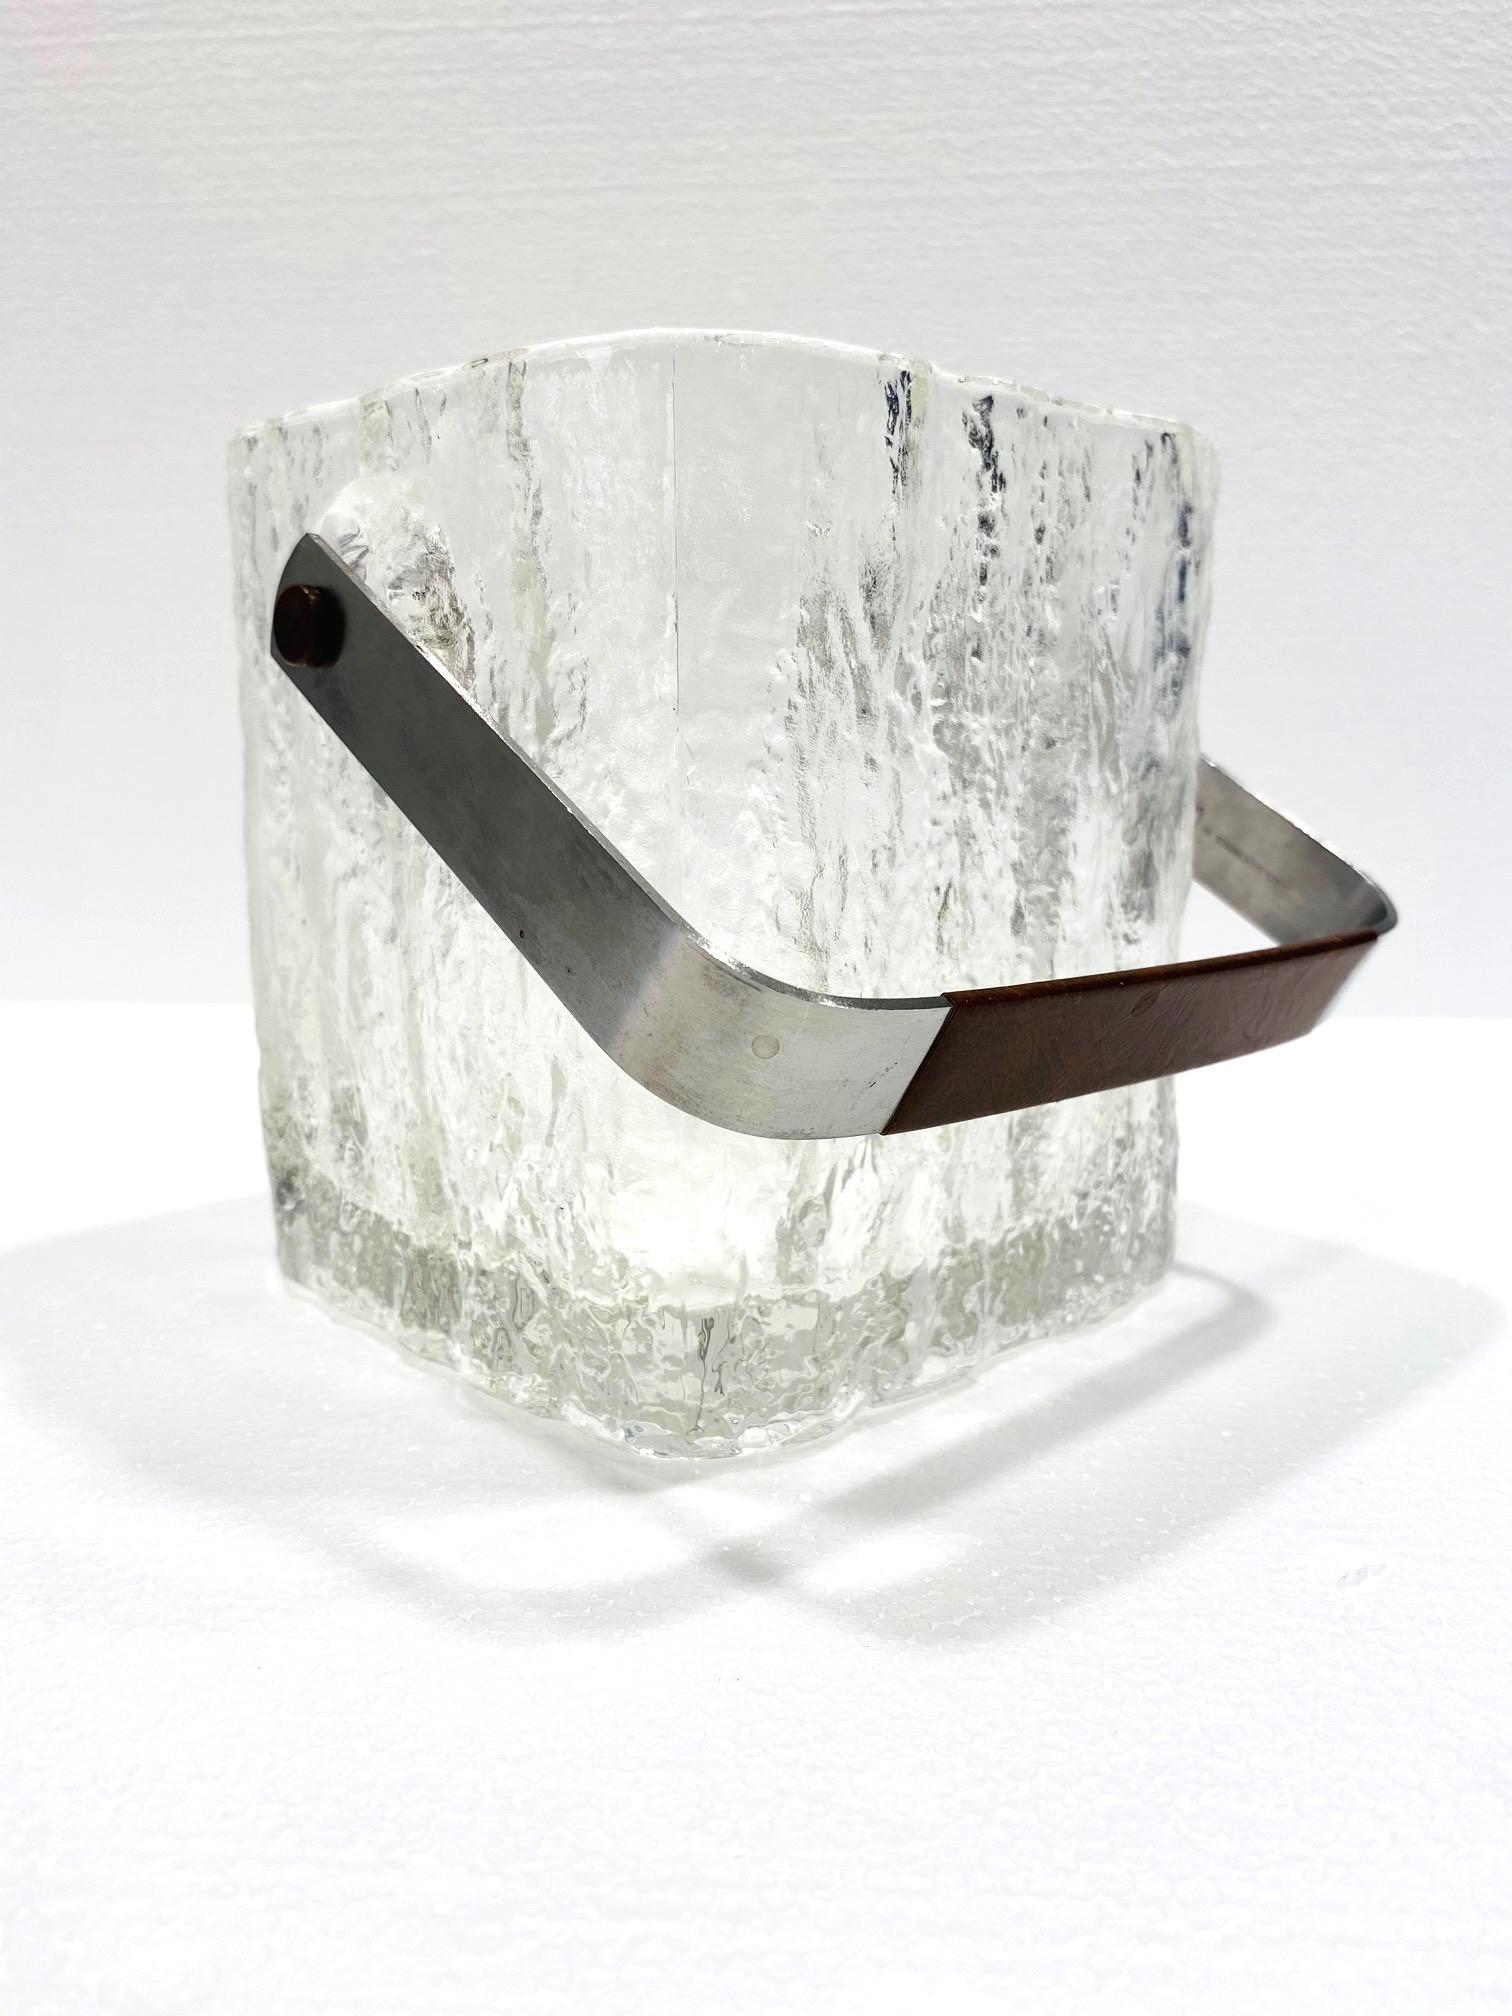 Mid-Century Modern glass ice bucket with textured ice cube design. Vintage Japanese personal size ice bucket comprised of thick chunky glass with polished edges and translucent base. Features a stainless steel handle wrapped in brown stitched